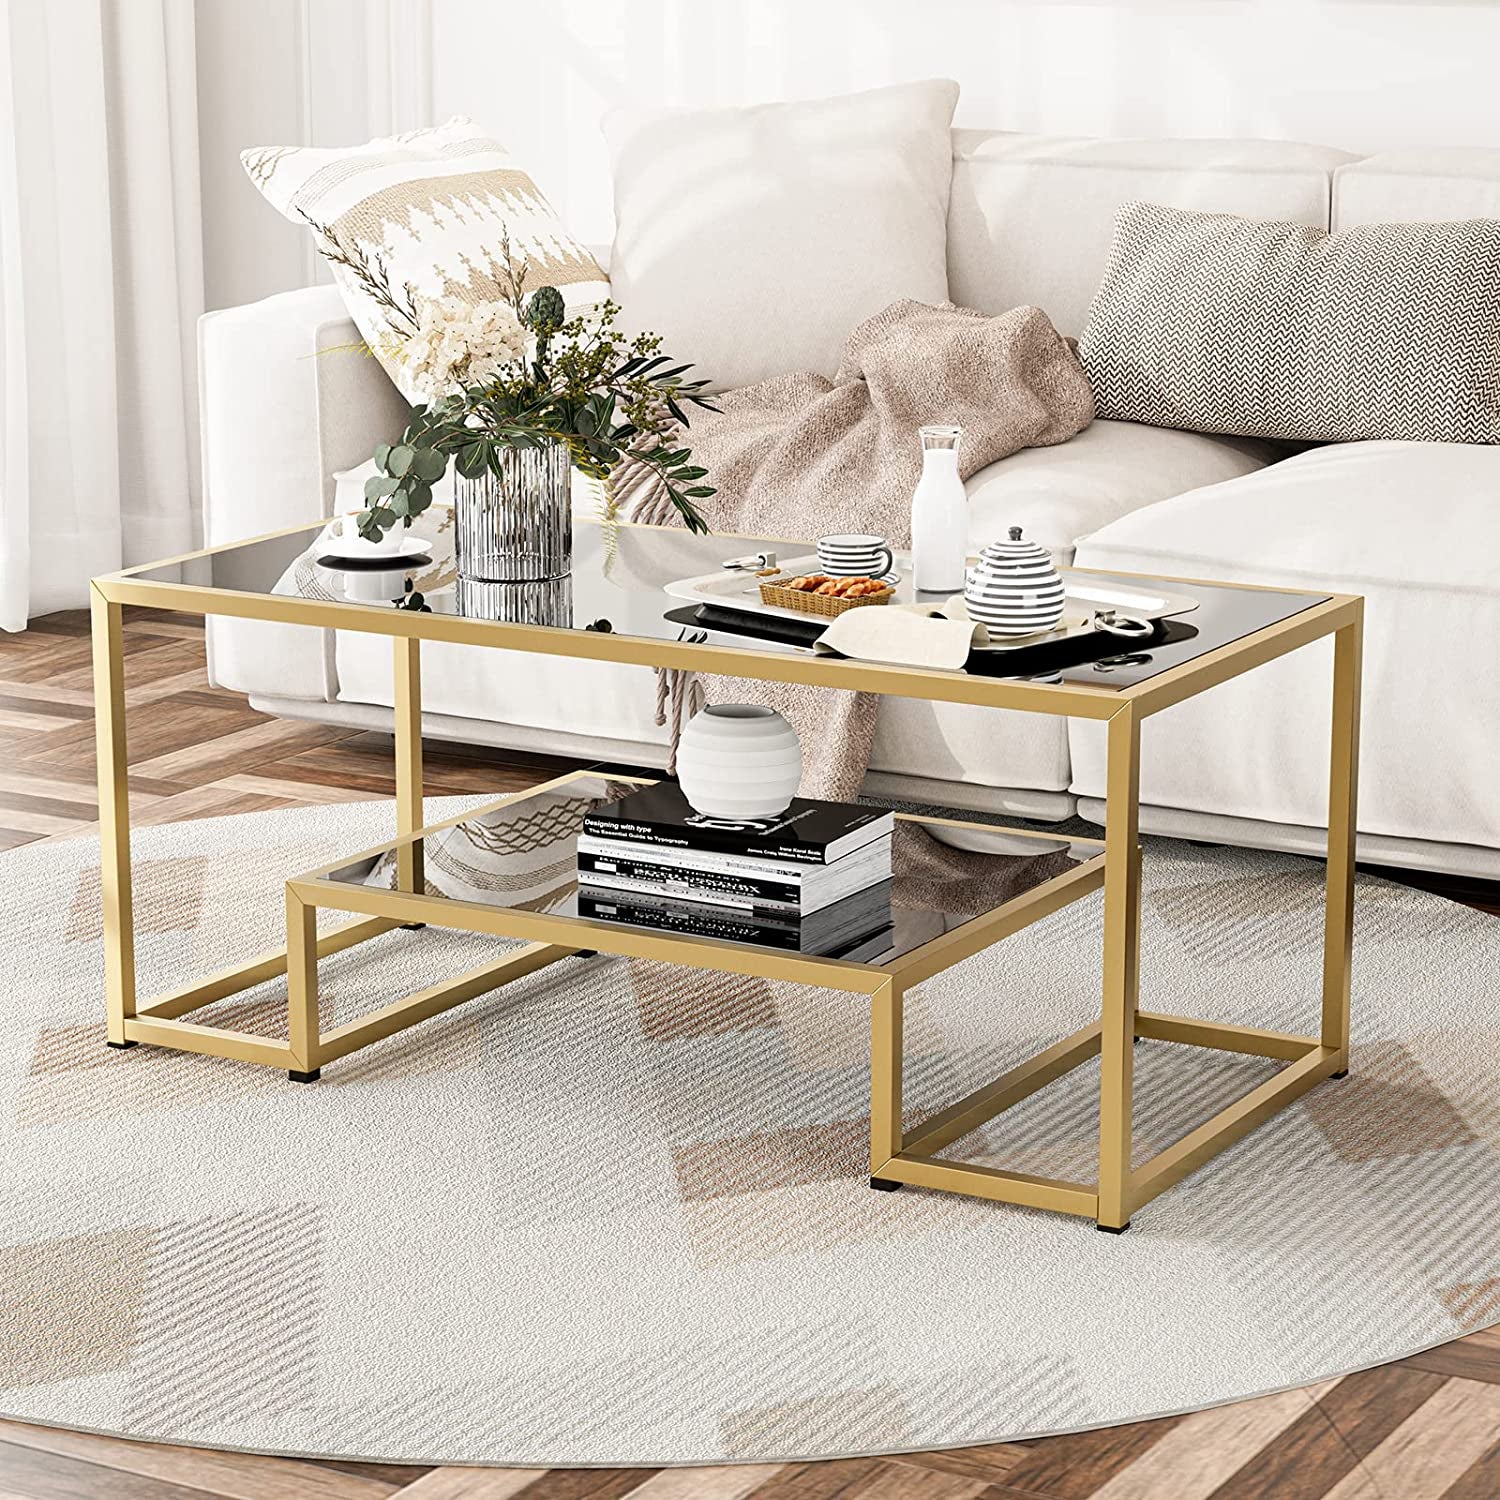 "Contemporary Black Coffee Table with Gold Metal Frame, Open Storage Shelf, and Modern Design - Ideal for Living Rooms, Offices, and Home Decor"